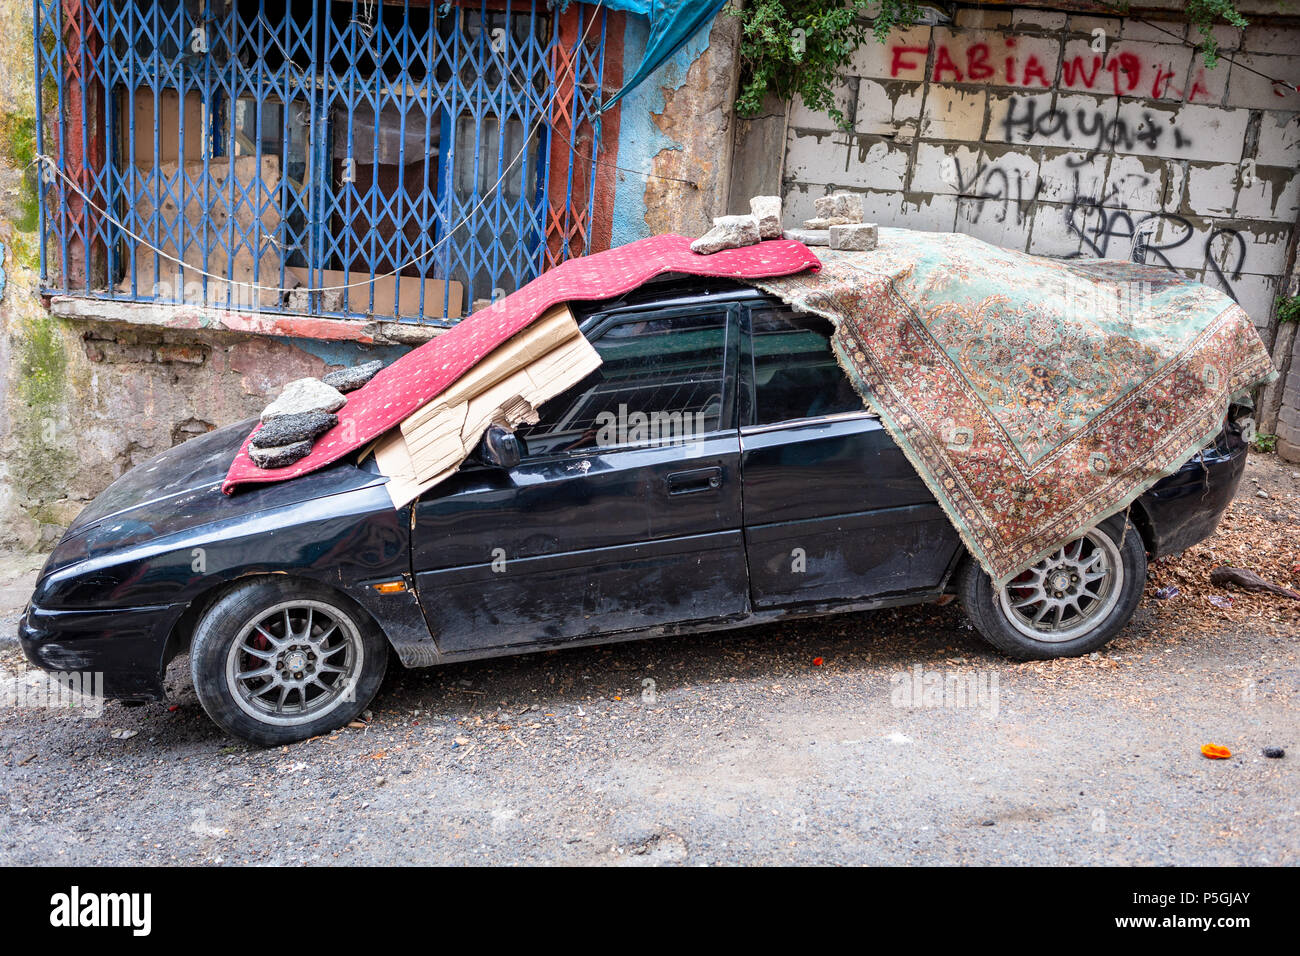 Residents prepare for the storm by covering their cars with blankets or protective materials expect strong thunder, heavy hail in Istanbul, Turkey. Stock Photo